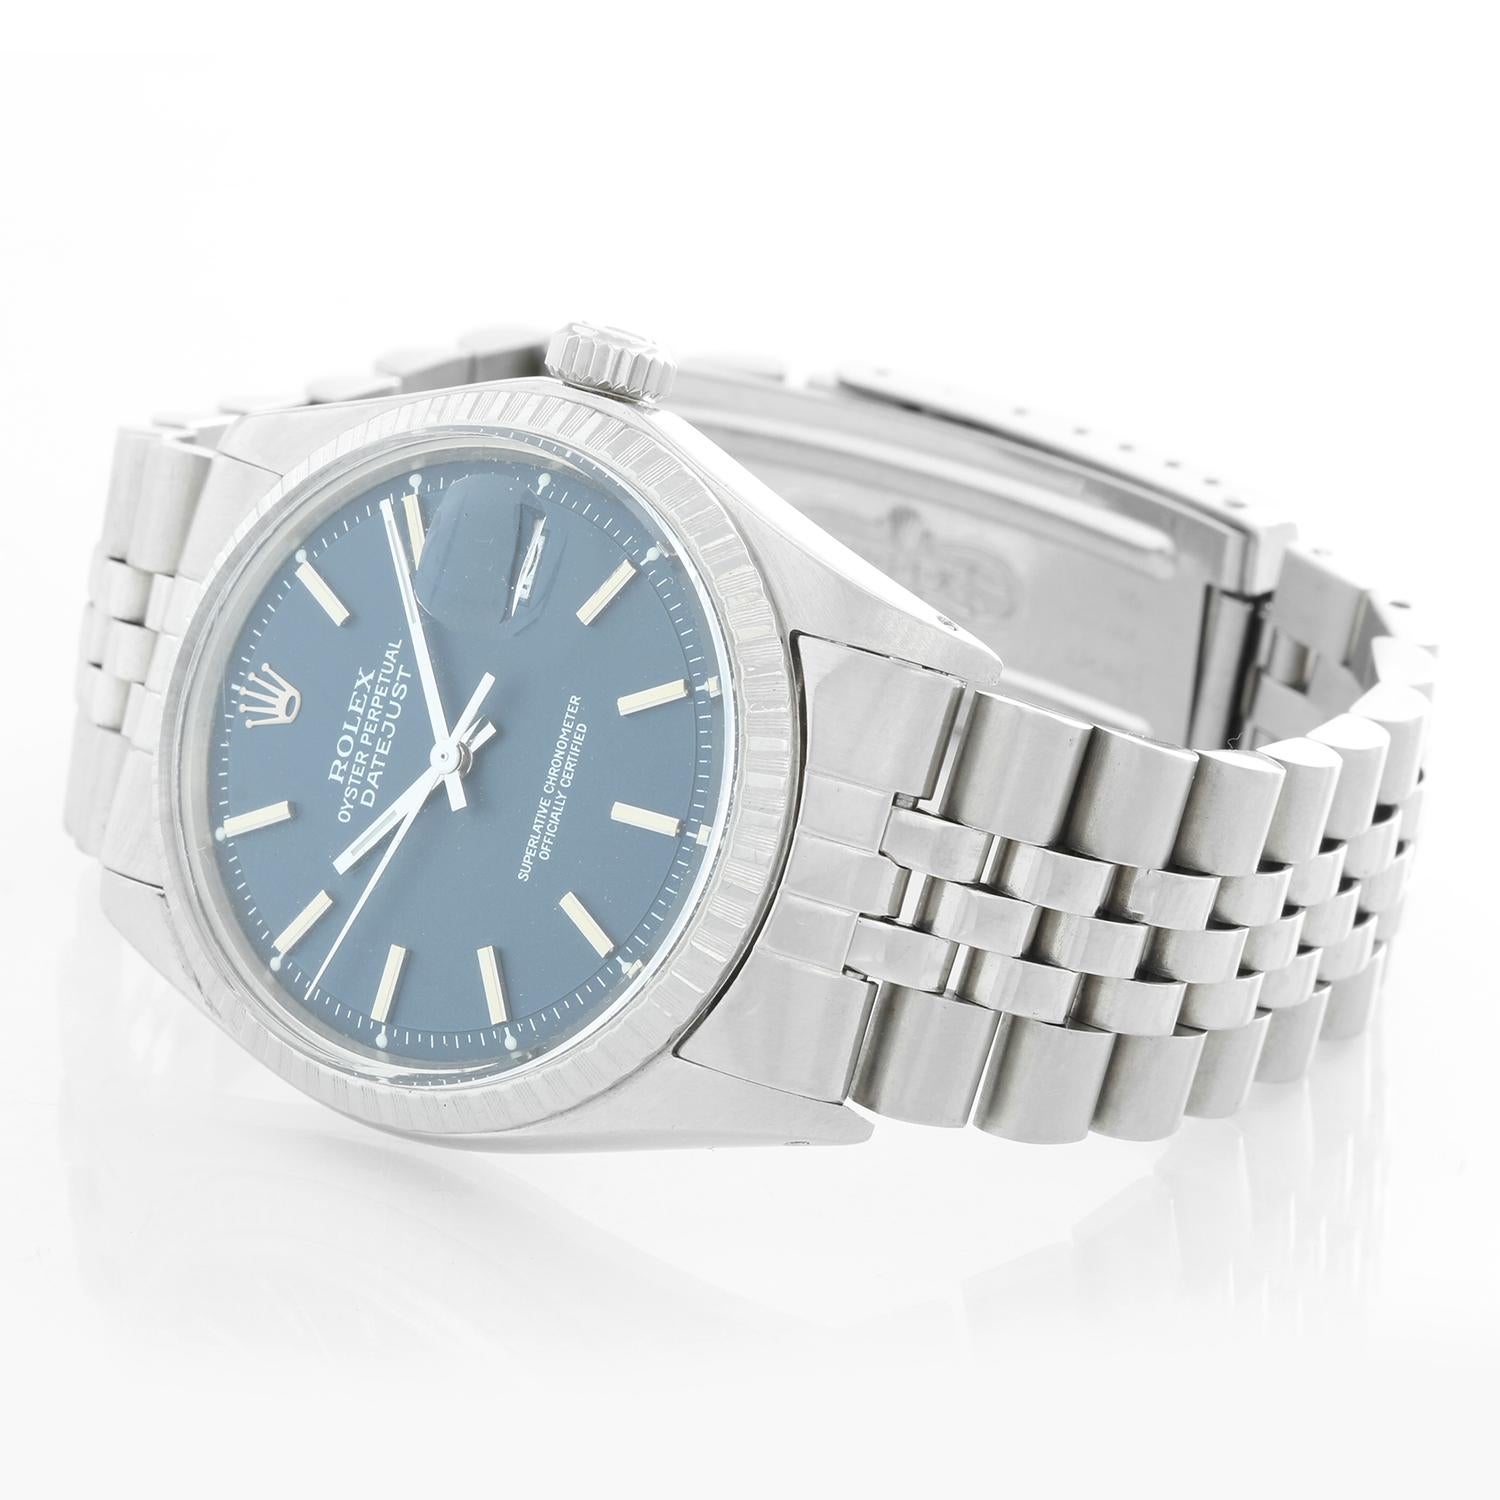 Rolex Datejust Men's Steel Automatic Winding Rare Blue Dial Watch 1603 - Automatic winding with date; Originally comes with an acrylic crystal but has been upgraded to a sapphire crystal. Stainless steel case with 18K White gold fluted bezell (36mm